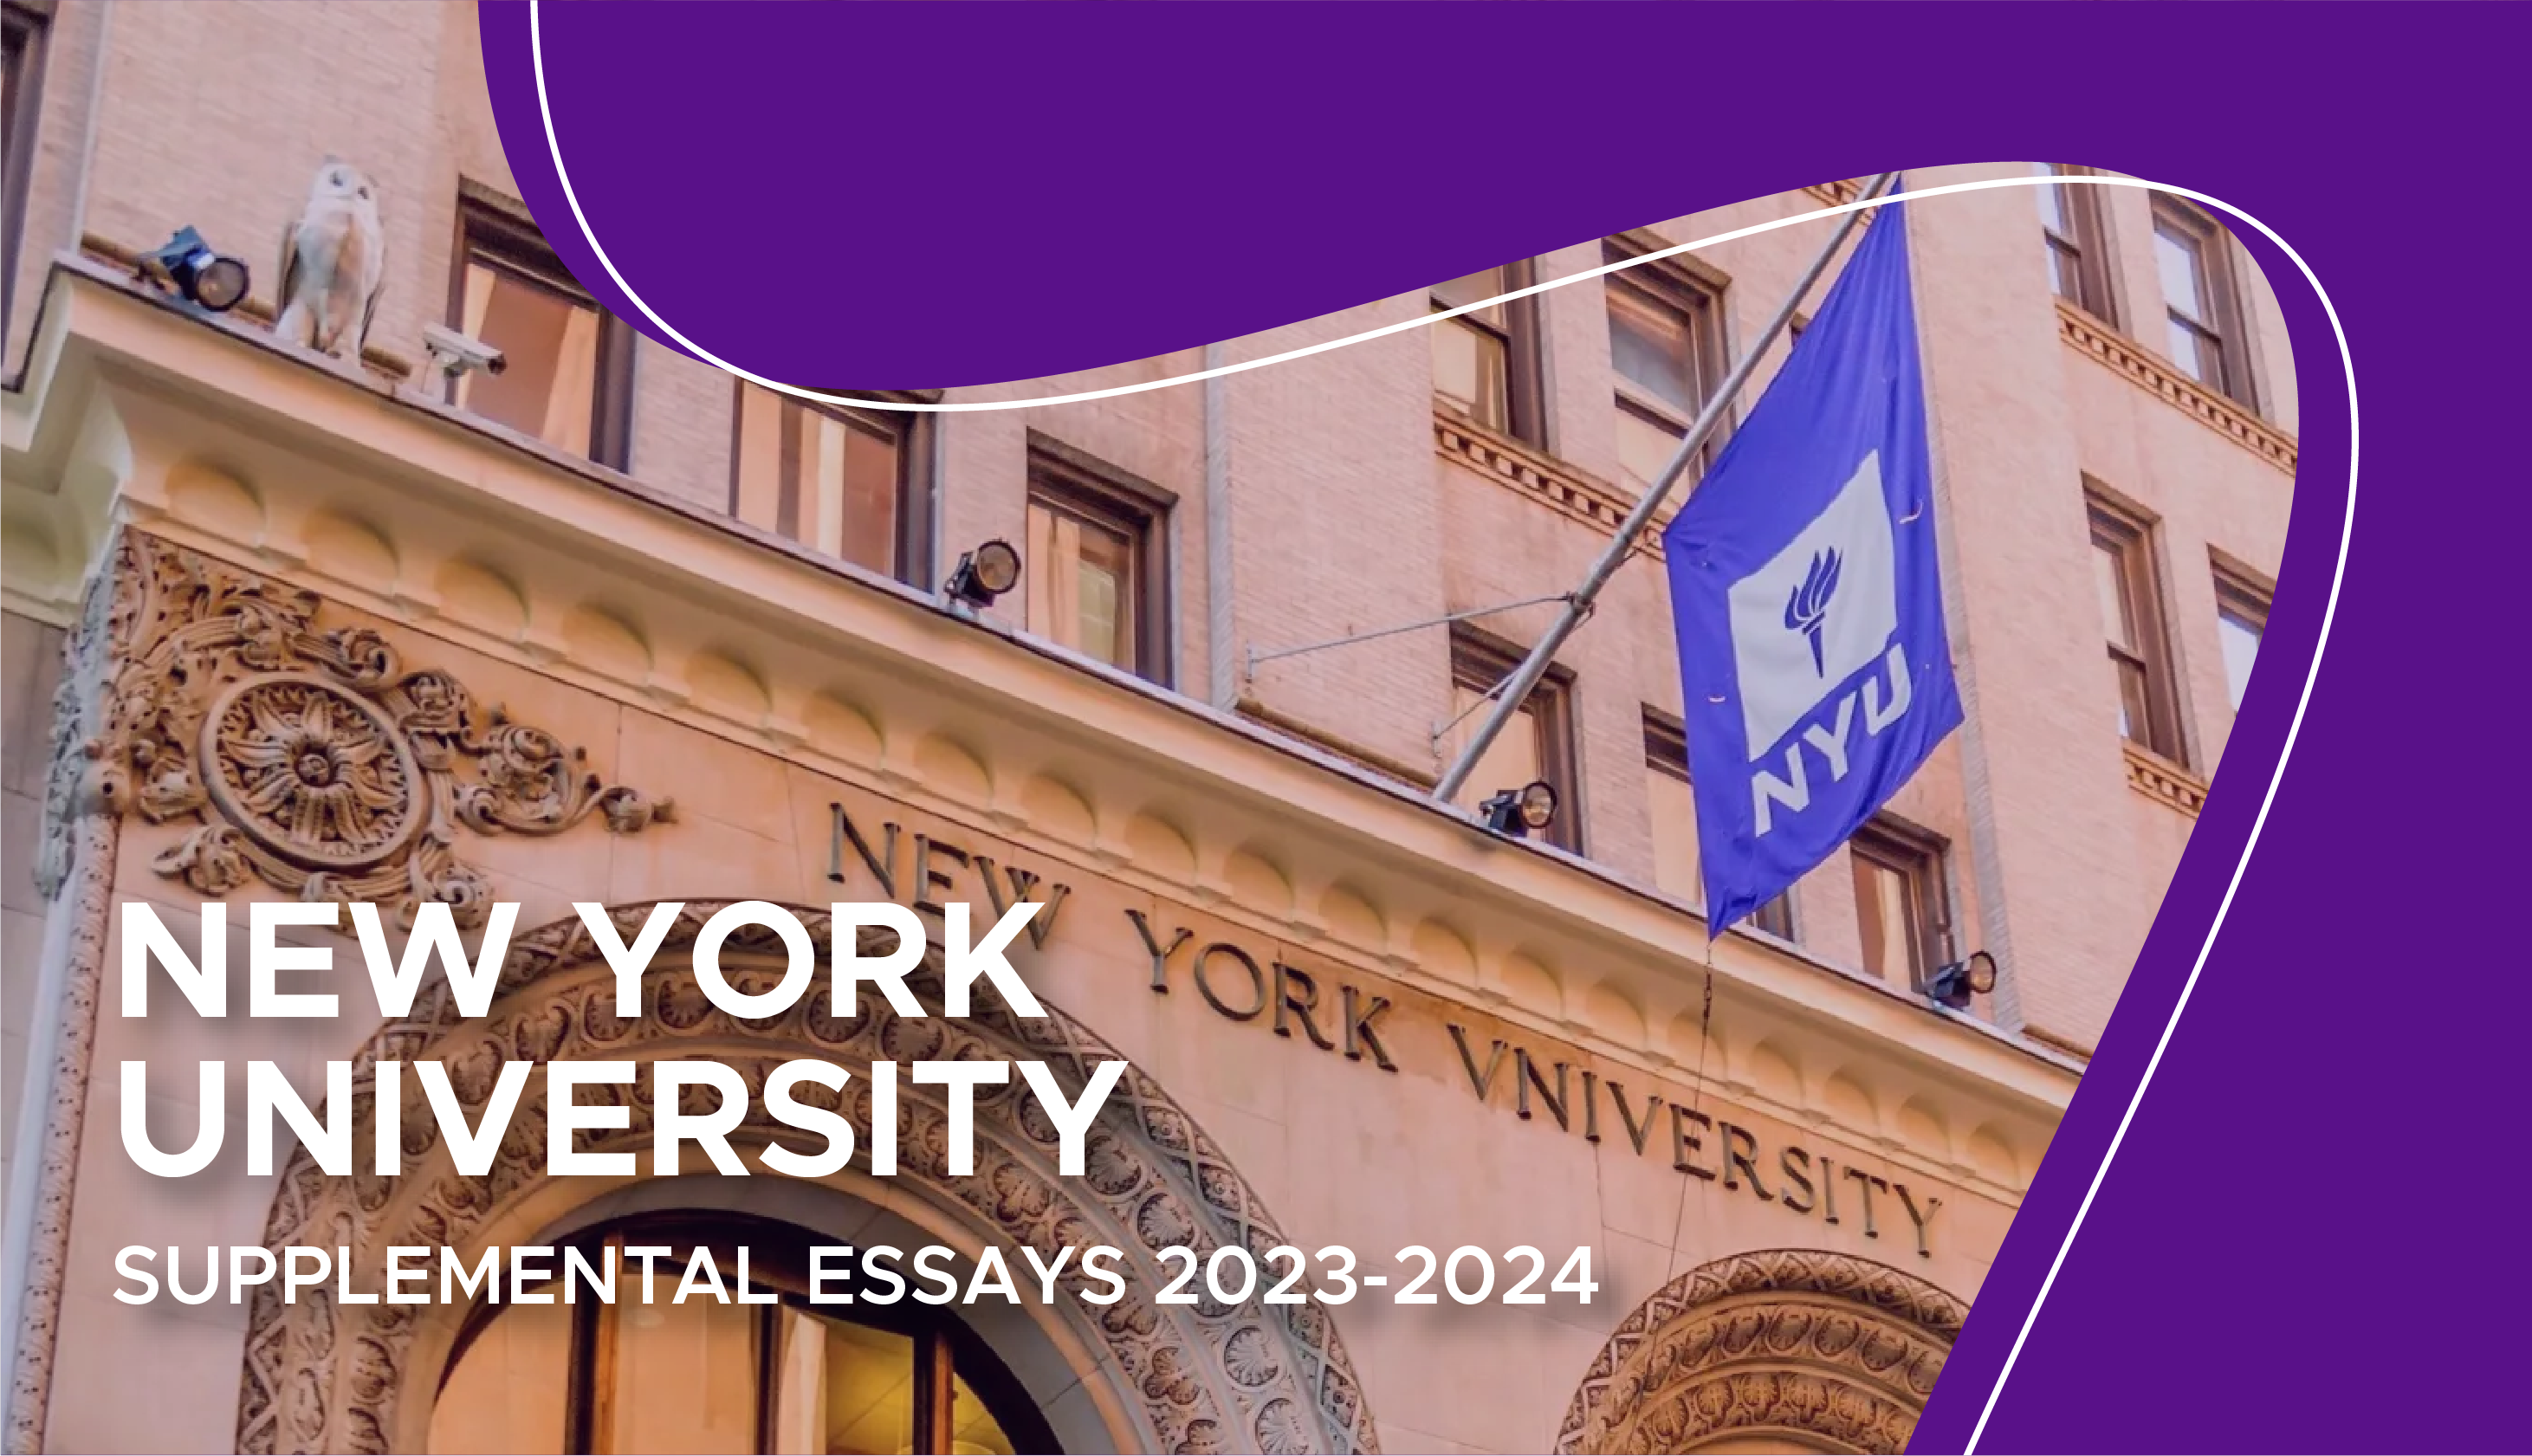 does nyu have supplemental essays 2023